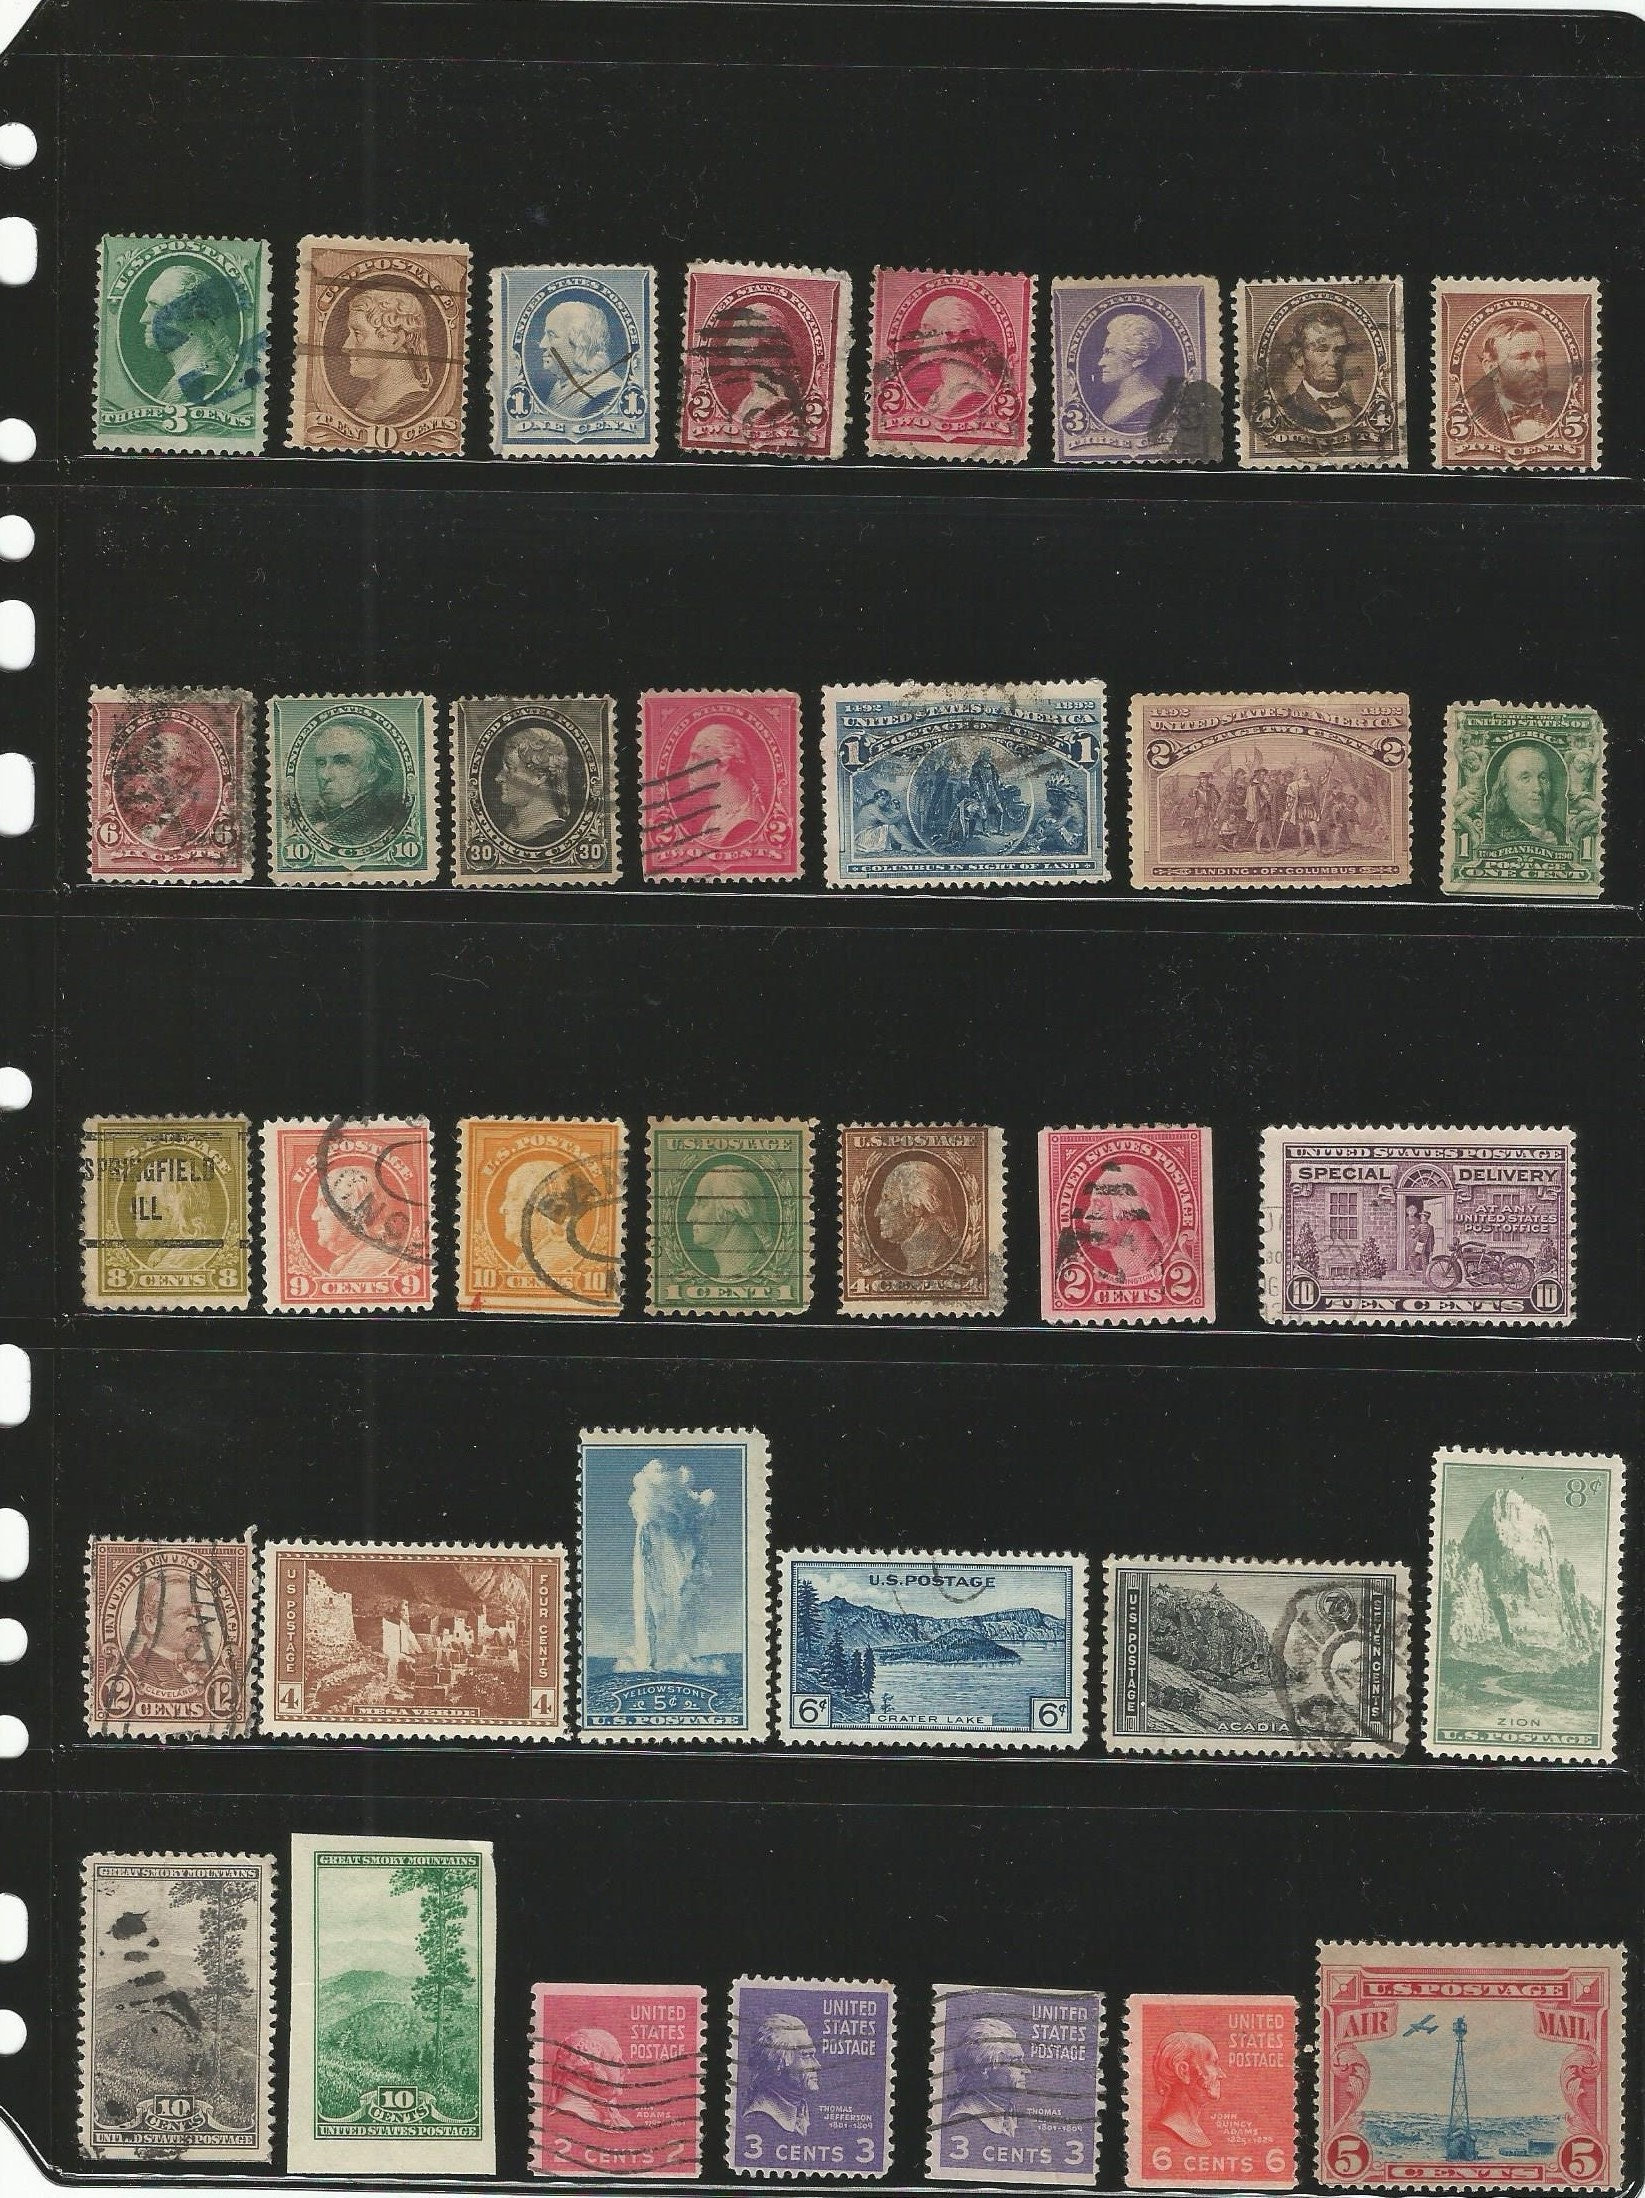 Antique US Stamp Collection 51 Postal Stamps Total Used and Mint Some From  1800s, 20th Century, Airmail & More Comes With Stockpage 